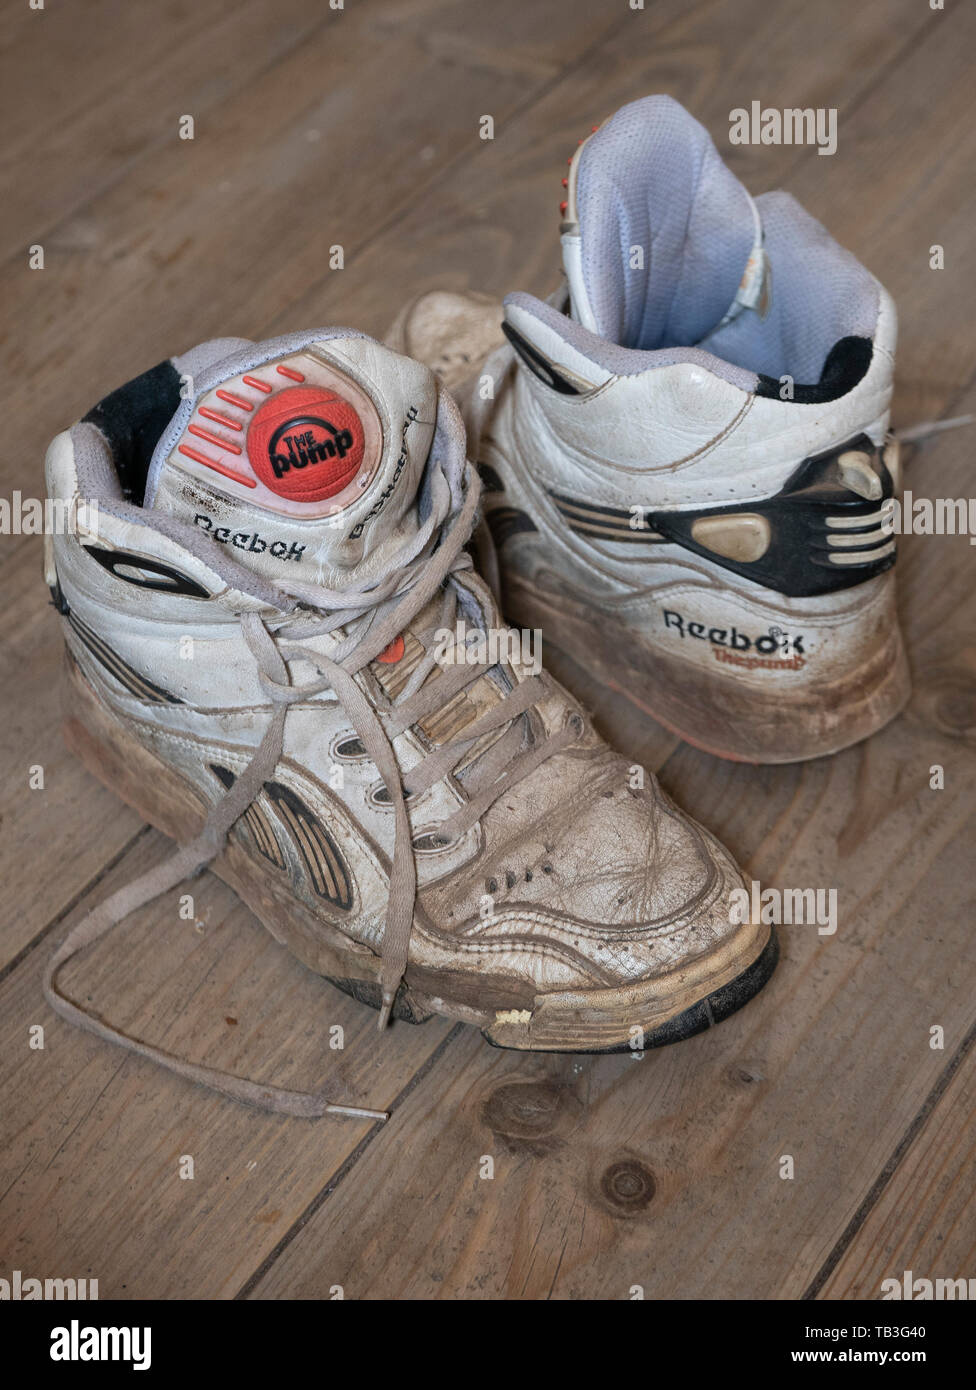 dilemma smykker Derfor Pair of old worn 1990s Reebok Pump white basketball sneakers Stock Photo -  Alamy